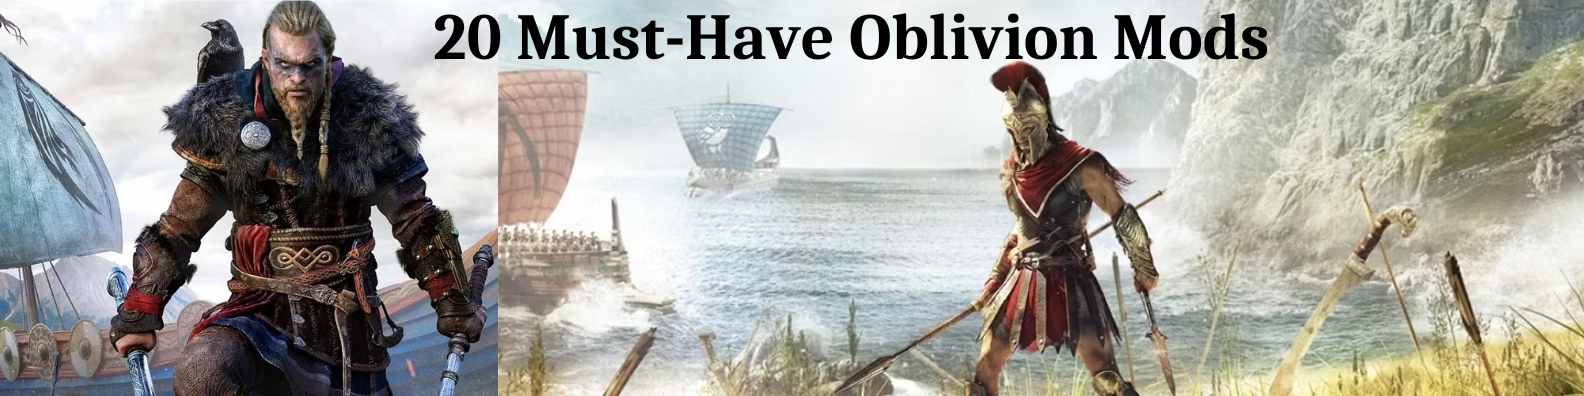 Mastering Cyrodiil: The Definitive Ranking of 20 Must-Have Oblivion Mods